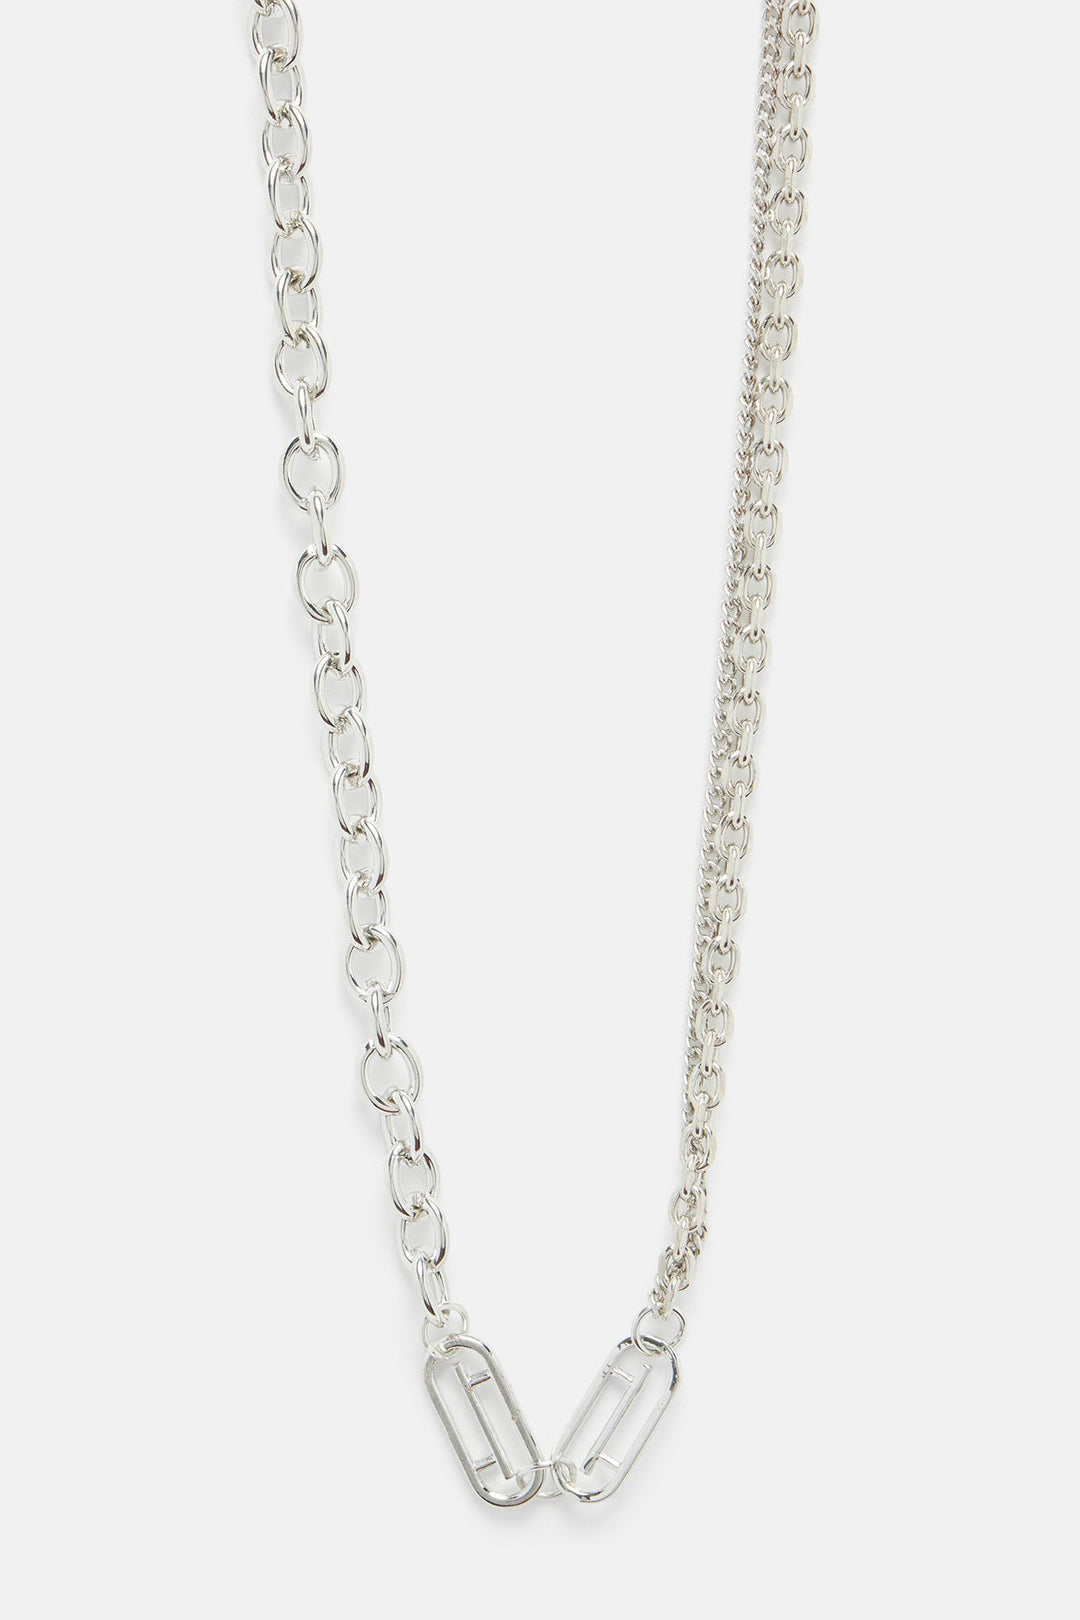 BlackTree Chain Necklace